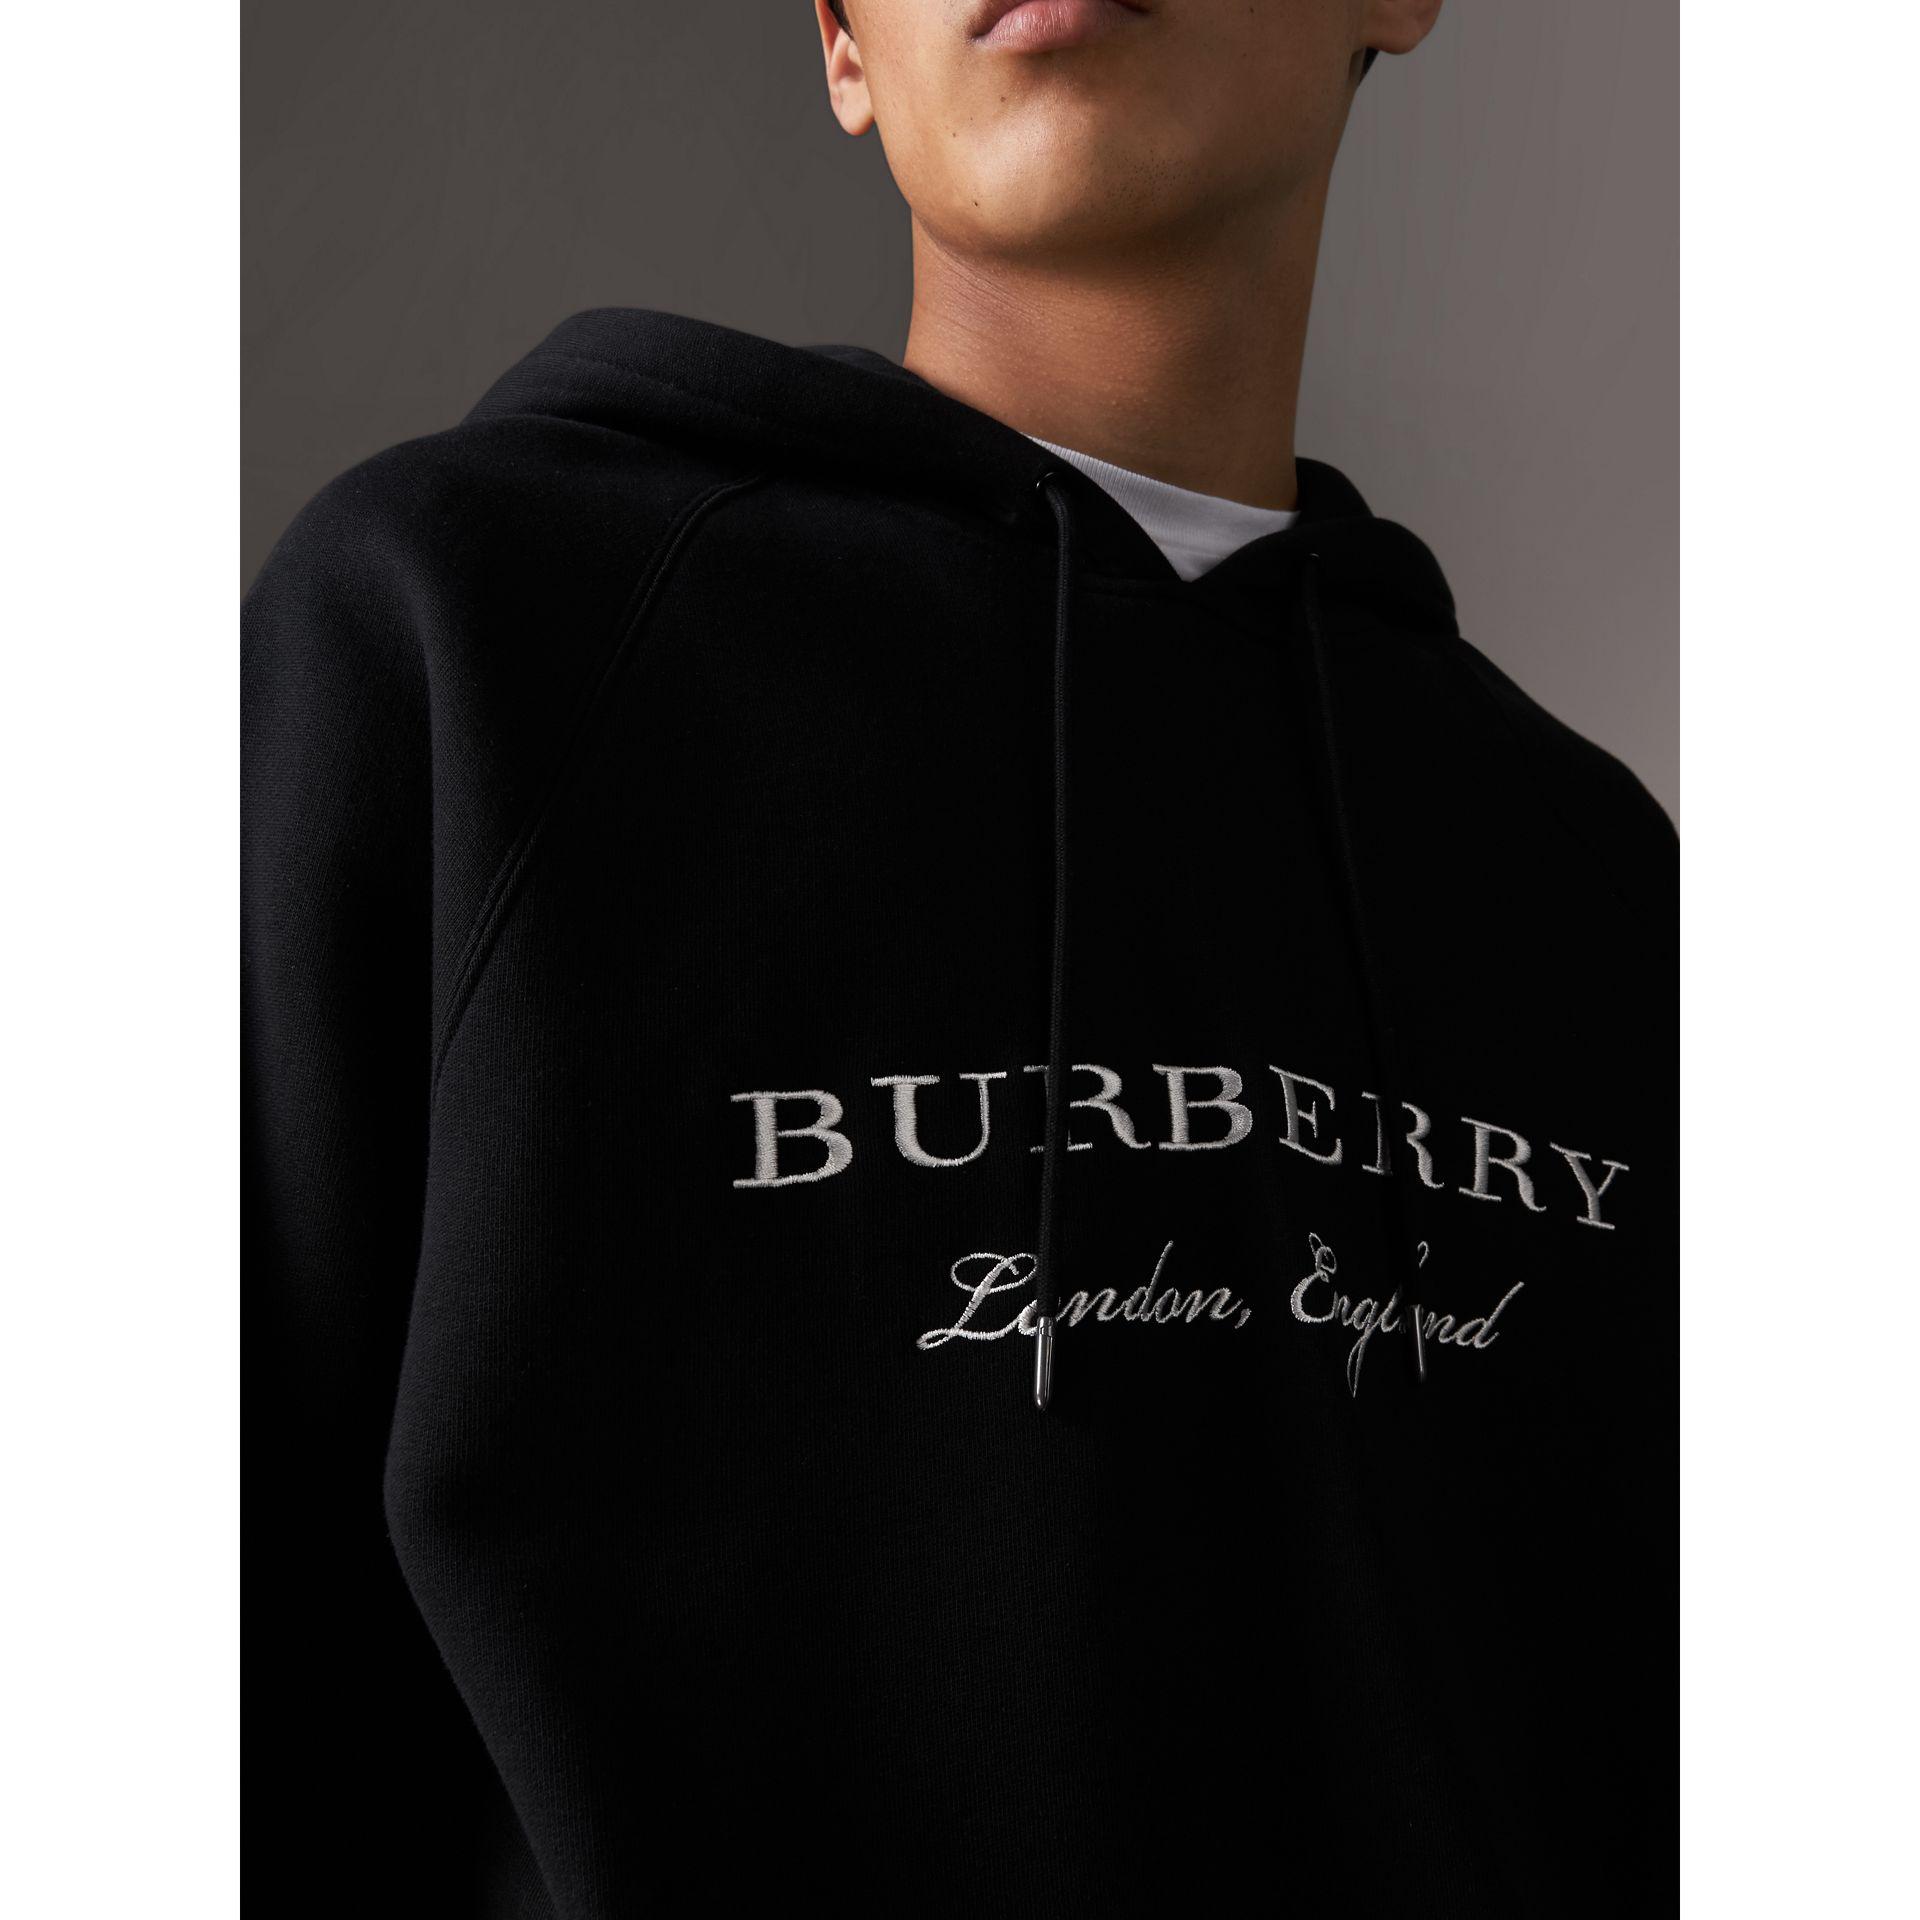 Burberry Embroidered Hooded Sweatshirt Black for | Lyst